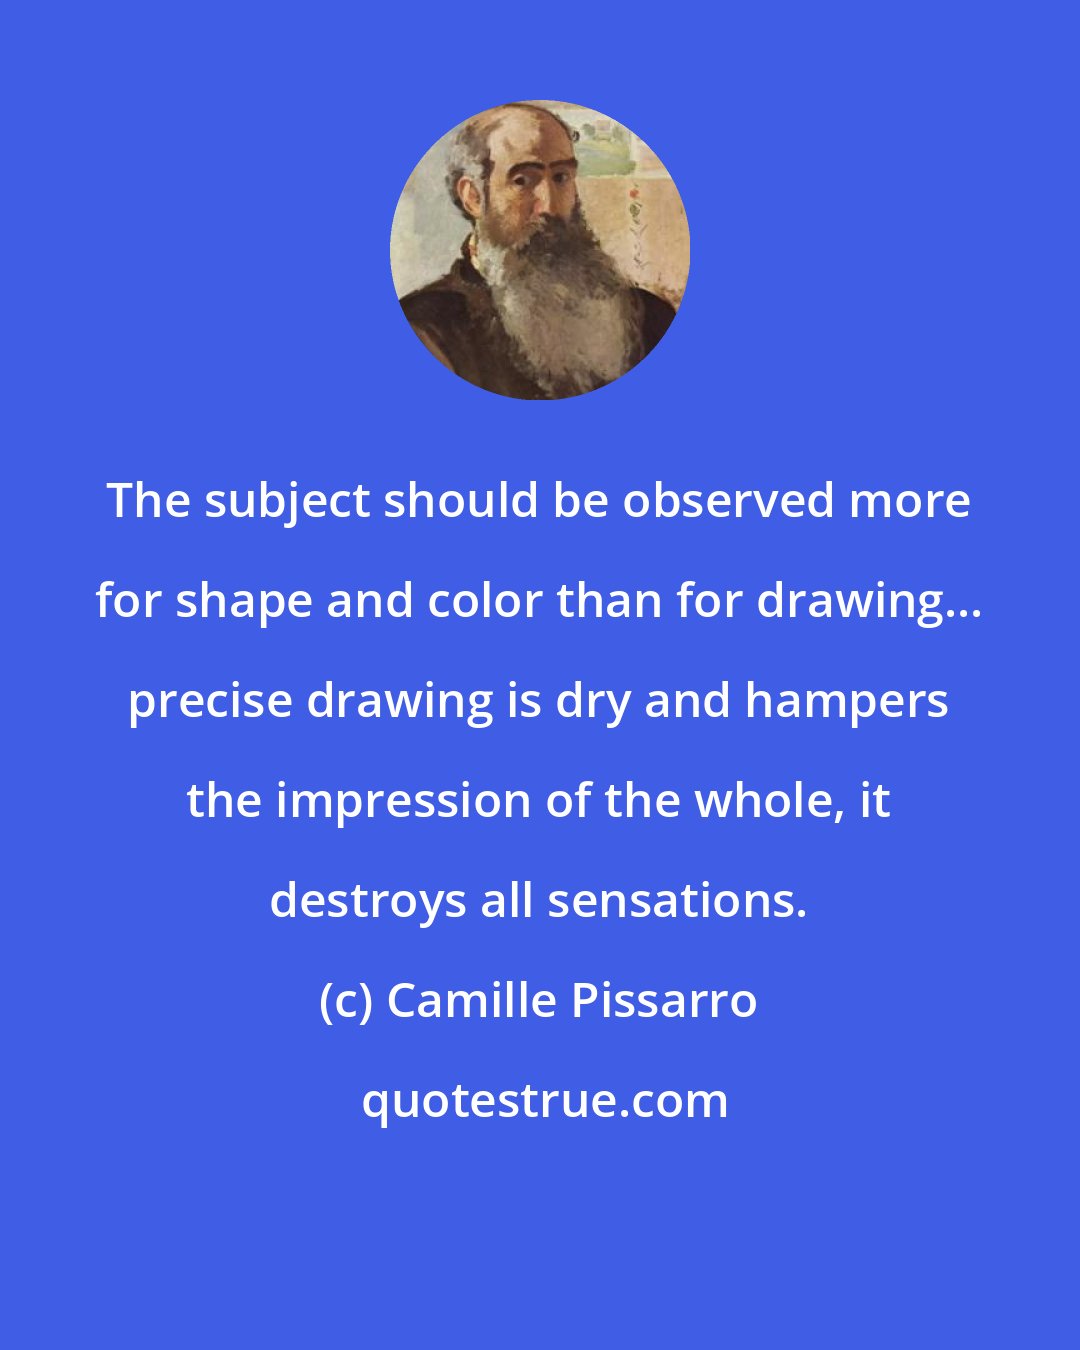 Camille Pissarro: The subject should be observed more for shape and color than for drawing... precise drawing is dry and hampers the impression of the whole, it destroys all sensations.